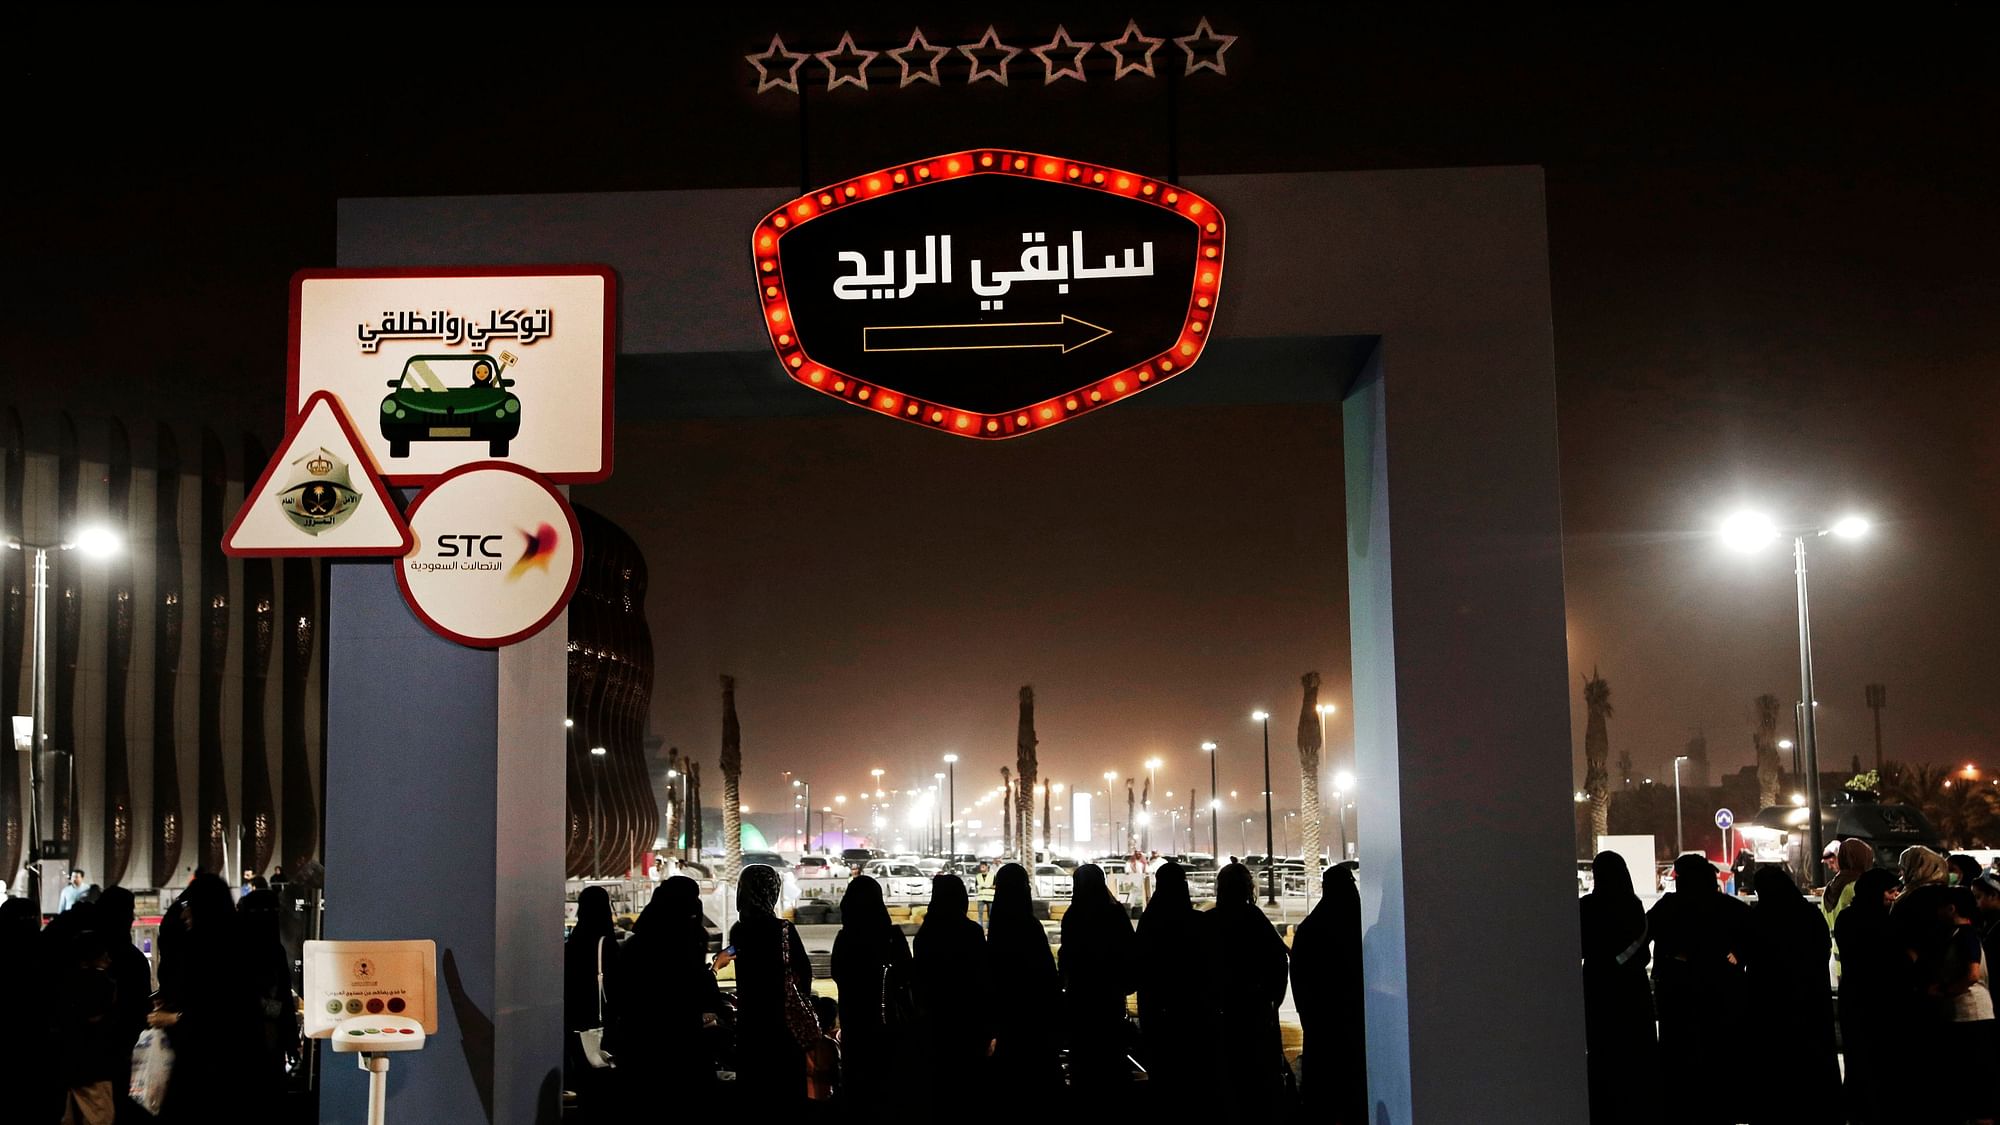 Women wait in line to ride go carts at a road safety event for female drivers launched at the Riyadh Park Mall in Riyad. For representational purposes.